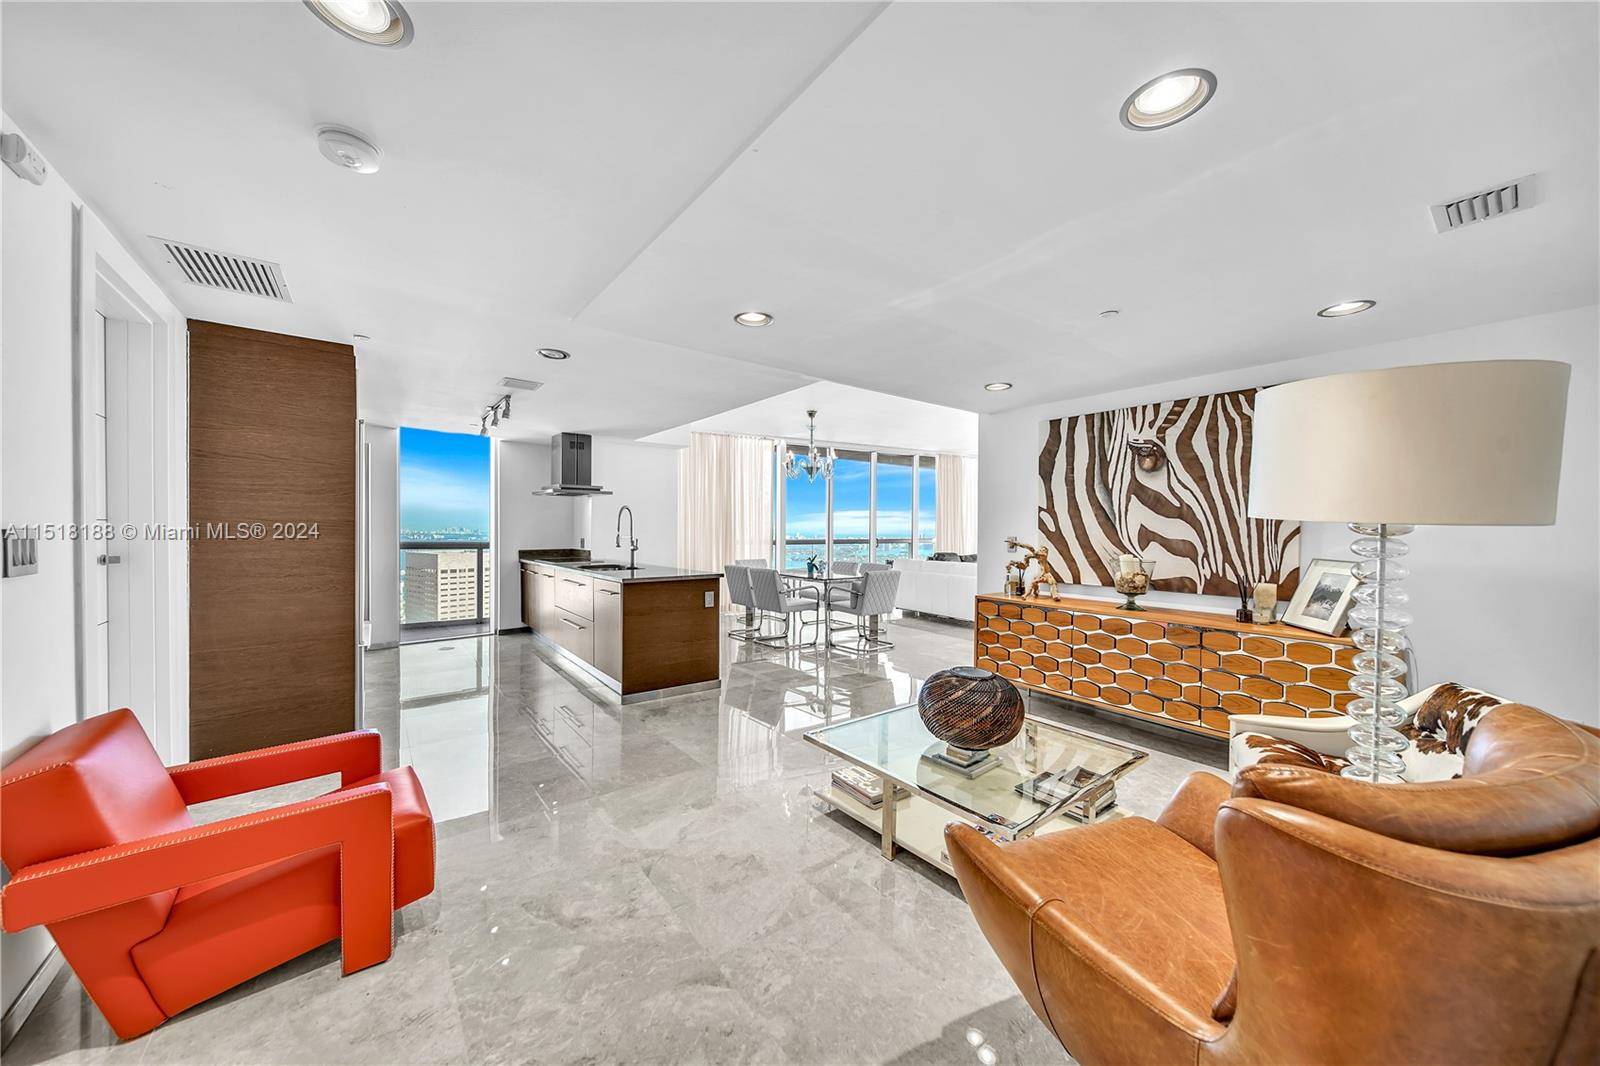 Welcome to this exquisite, fully furnished 2 bedroom, 2 bathroom residence that redefines luxury living.